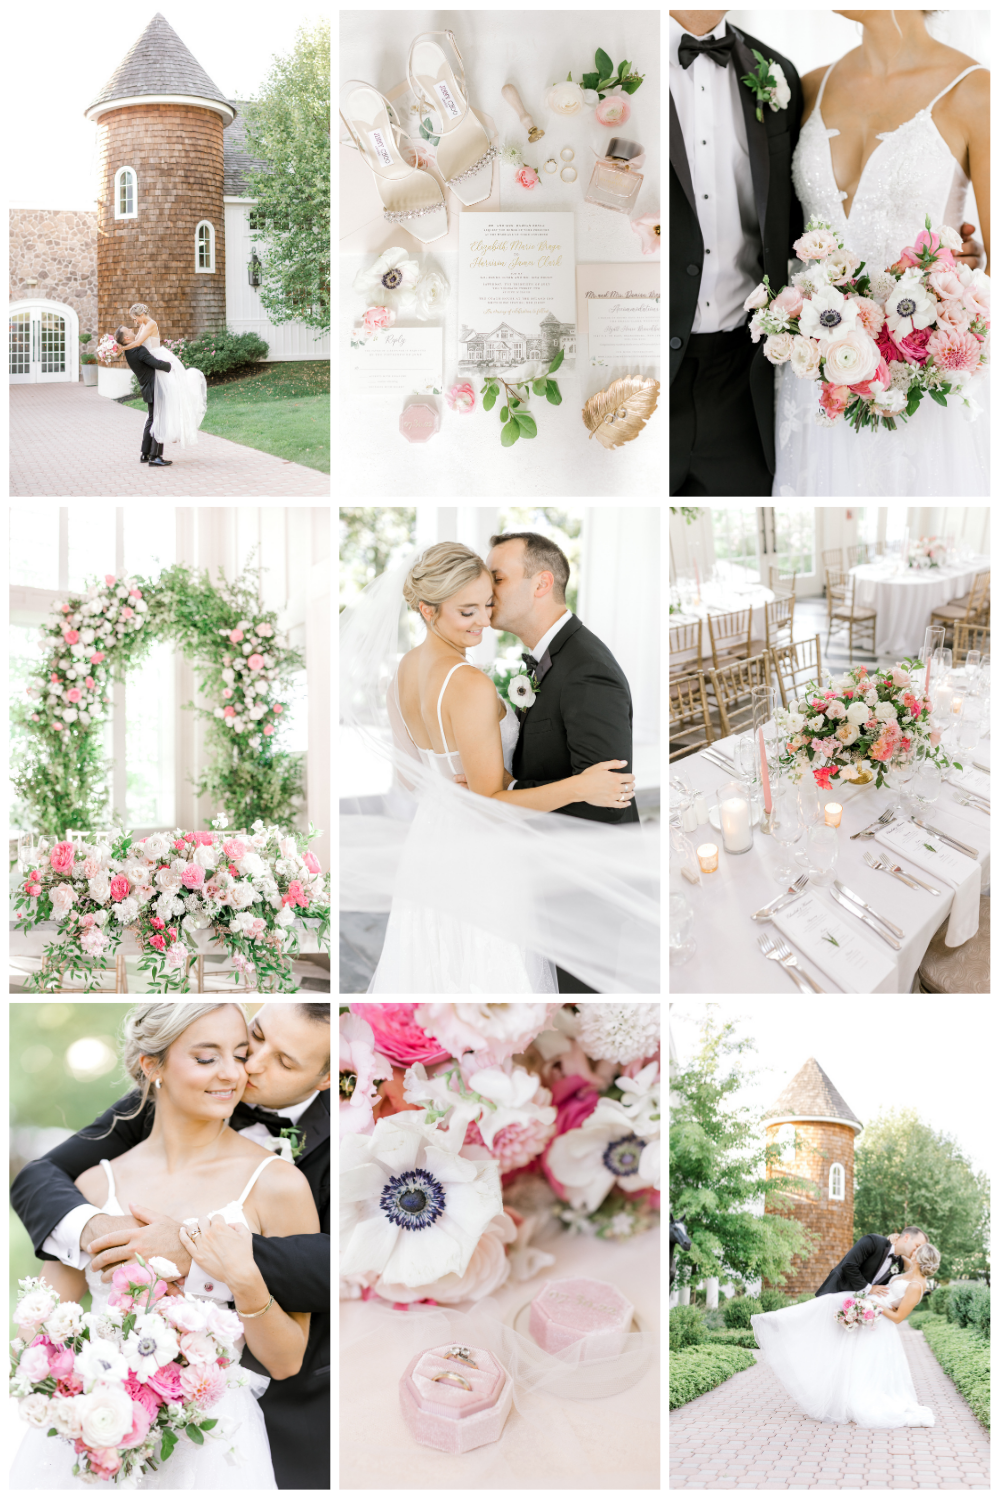 Elegant Ryland Inn wedding with pink florals photographed by New Jersey wedding photographer Susan Elizabeth Photography